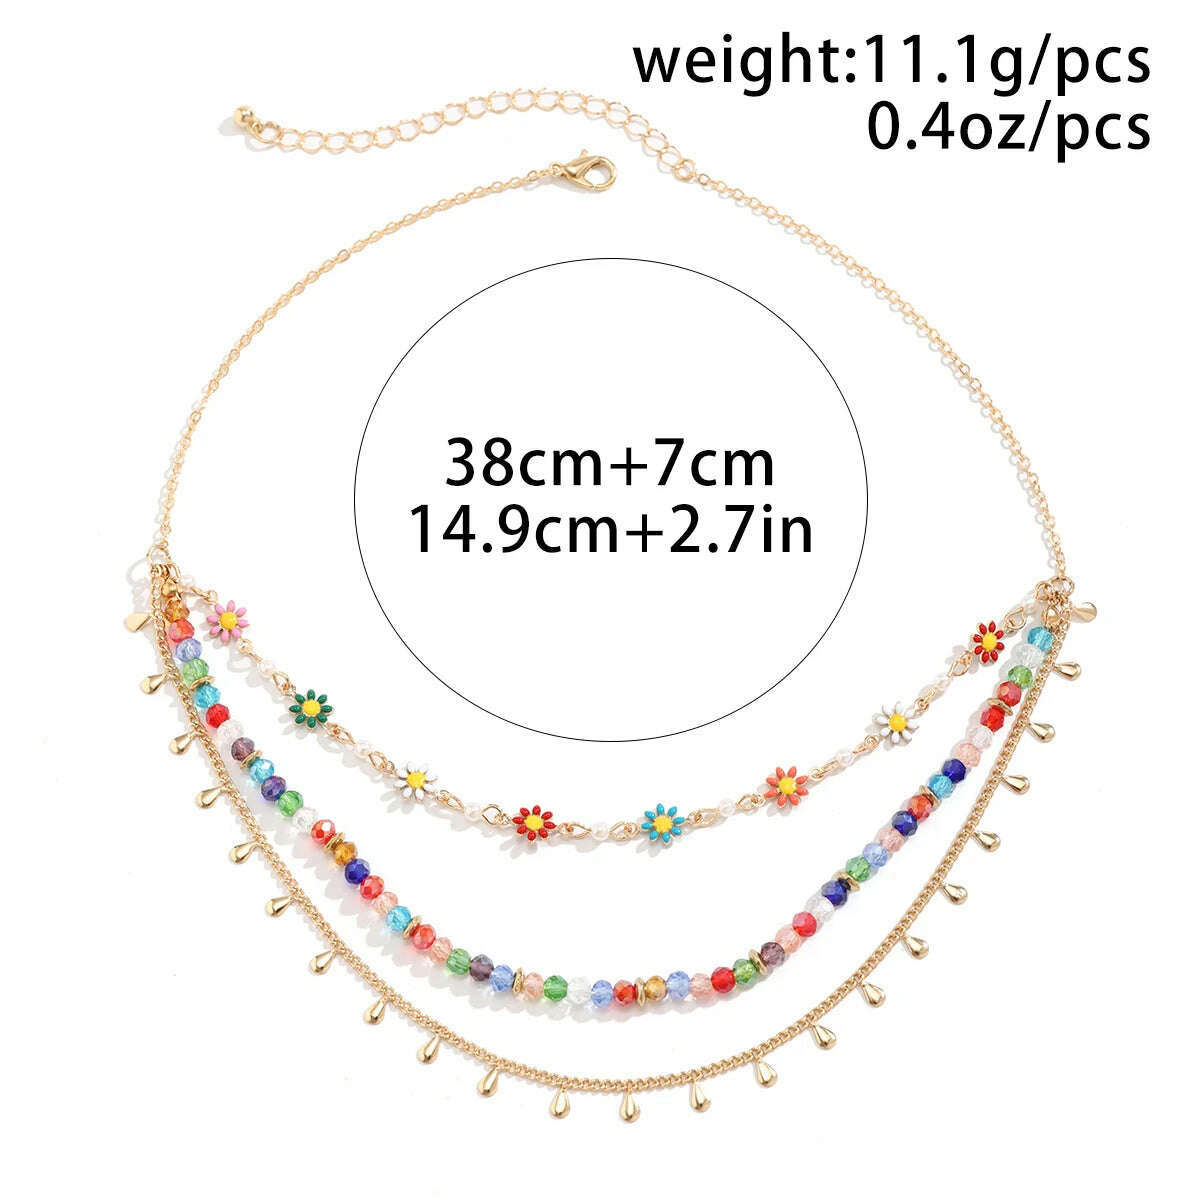 KIMLUD, Multilayer Boho Colorful Tiny Flower Tassel Chain Necklace for Women Wed Bridal Korean Fashion Bead Choker Aesthetic Y2K Jewelry, KIMLUD Womens Clothes